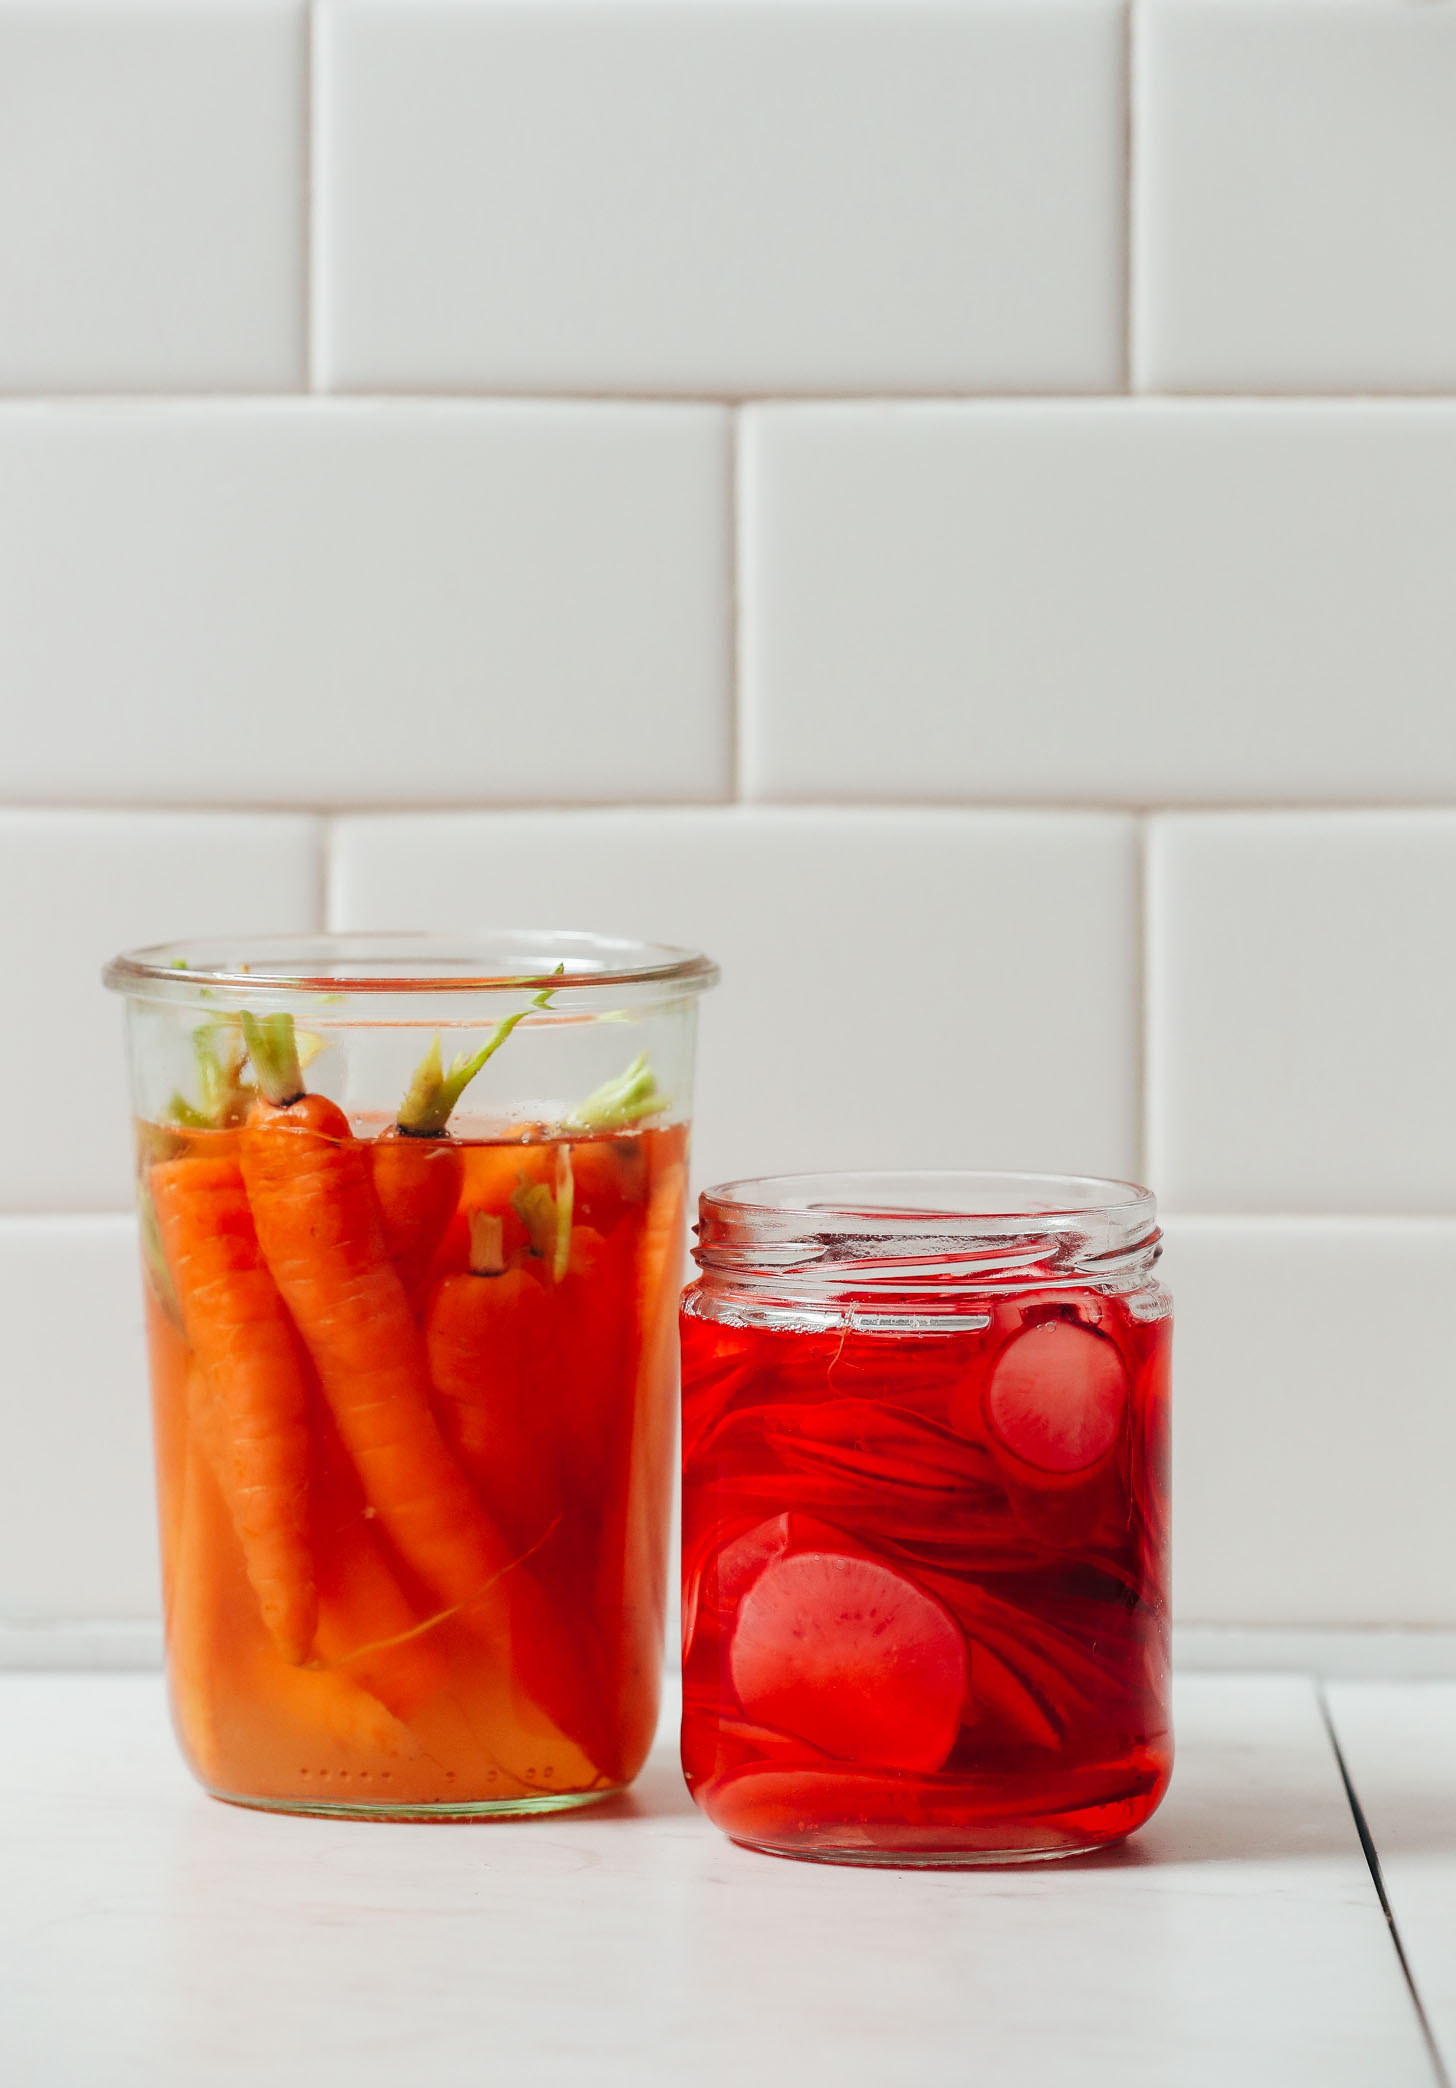 Jar of Quick Pickled Carrots next to a jar of Quick Pickled Radish